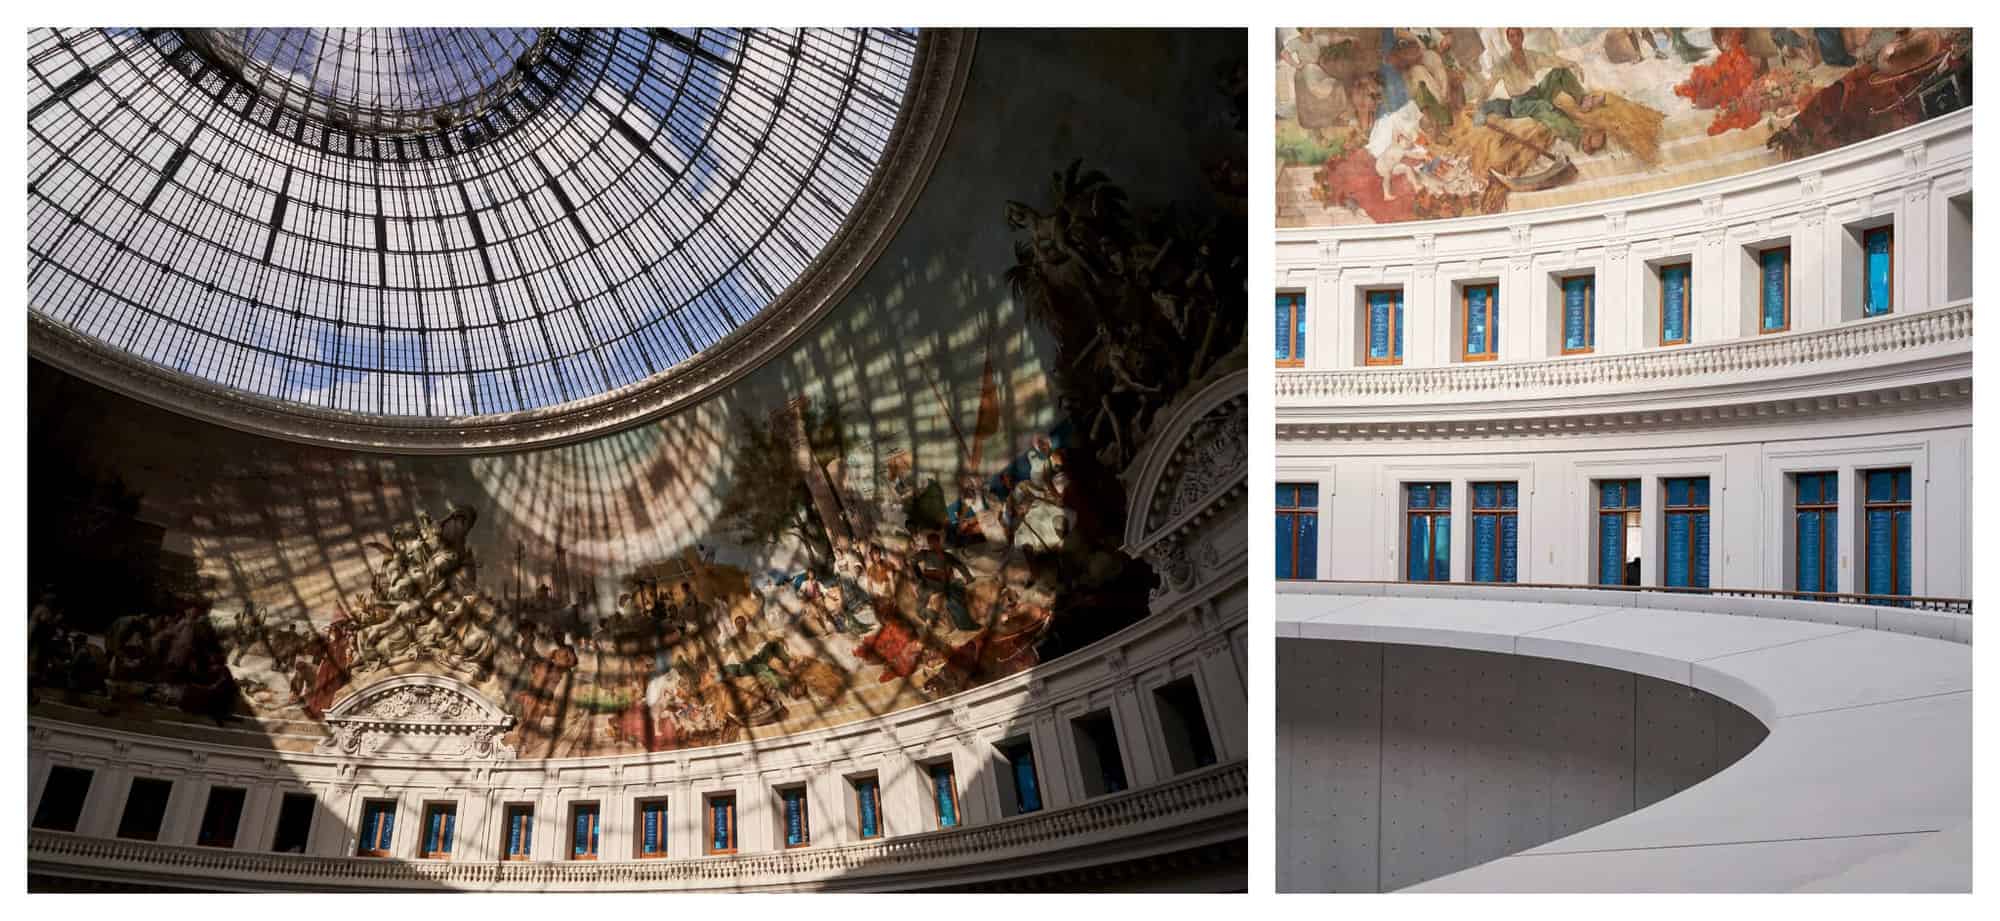 Left: a large circular room of classic design with a glass ceiling that is shining light onto a large mural. This is a view of the soon to open Bourse de Commerce, one of 5 arty venues in Paris to know right now. Right: A large circular room with white white and a colorful mural. There are several windows with blue glass. 